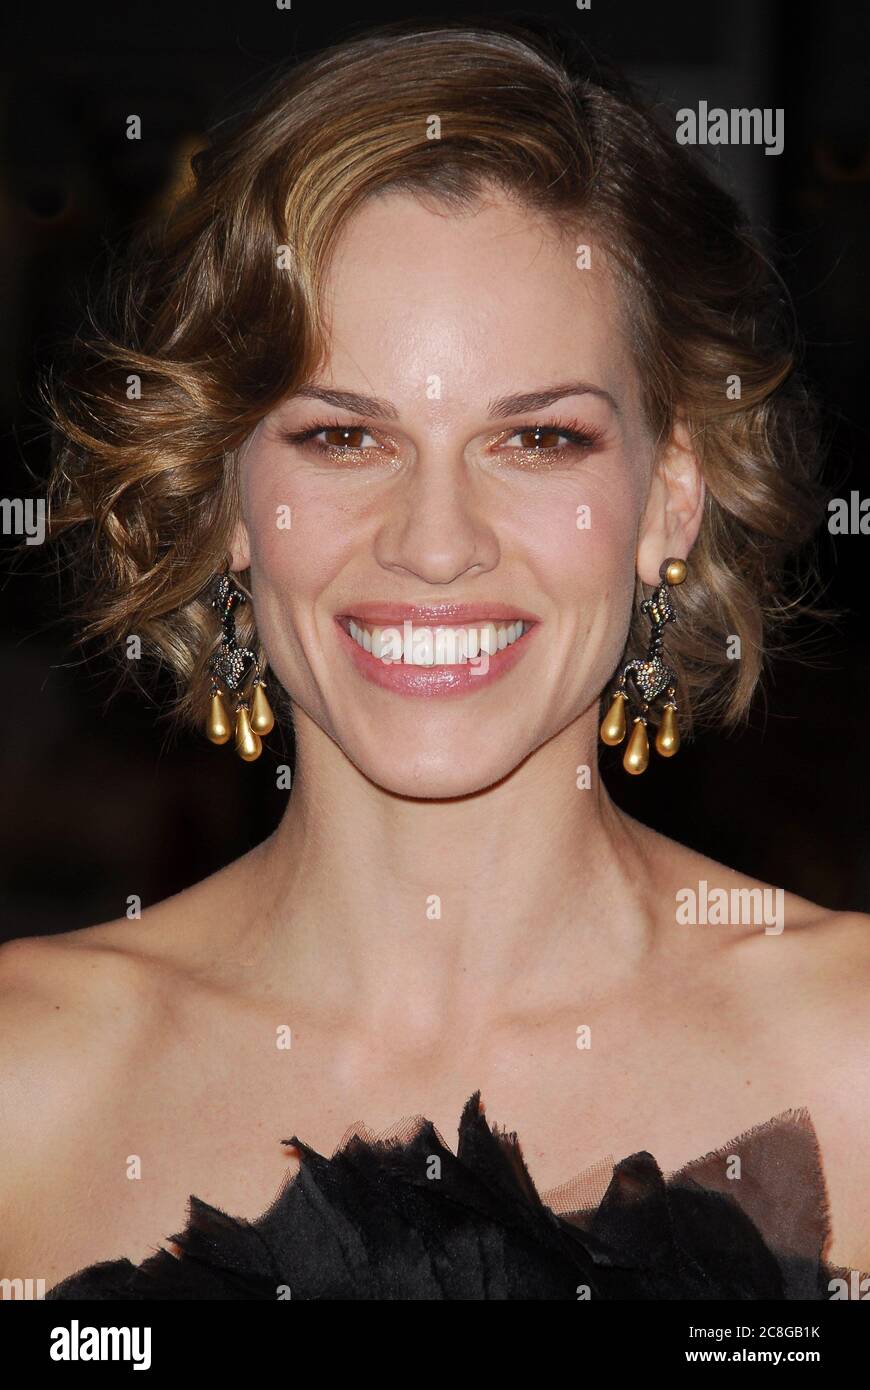 Hilary Swank at the World Premiere of "P.S. I Love You" held at the Grauman's Chinese Theater in Hollywood, CA. The event took place on Sunday, Decemeber 9, 2007. Photo by: SBM / PictureLux  - File Reference # 34006-12564SBMPLX Stock Photo